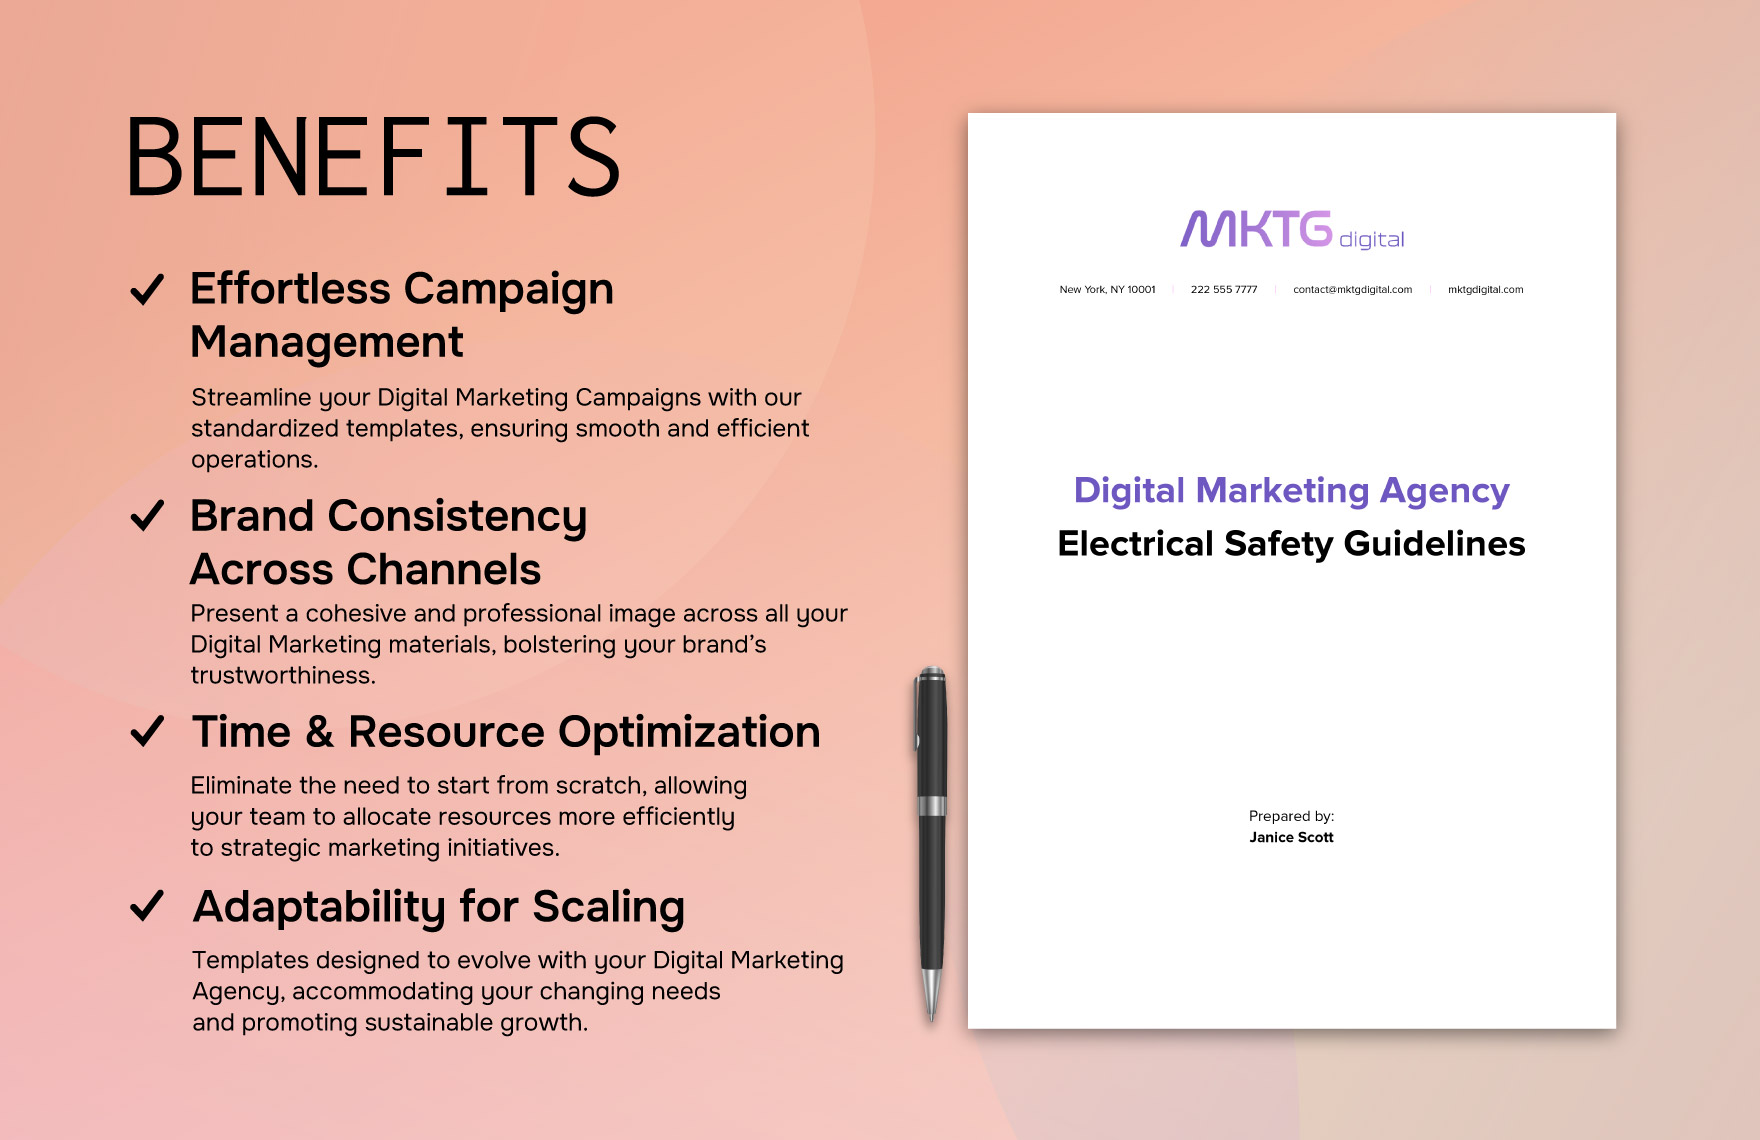 Digital Marketing Agency Electrical Safety Guidelines Template